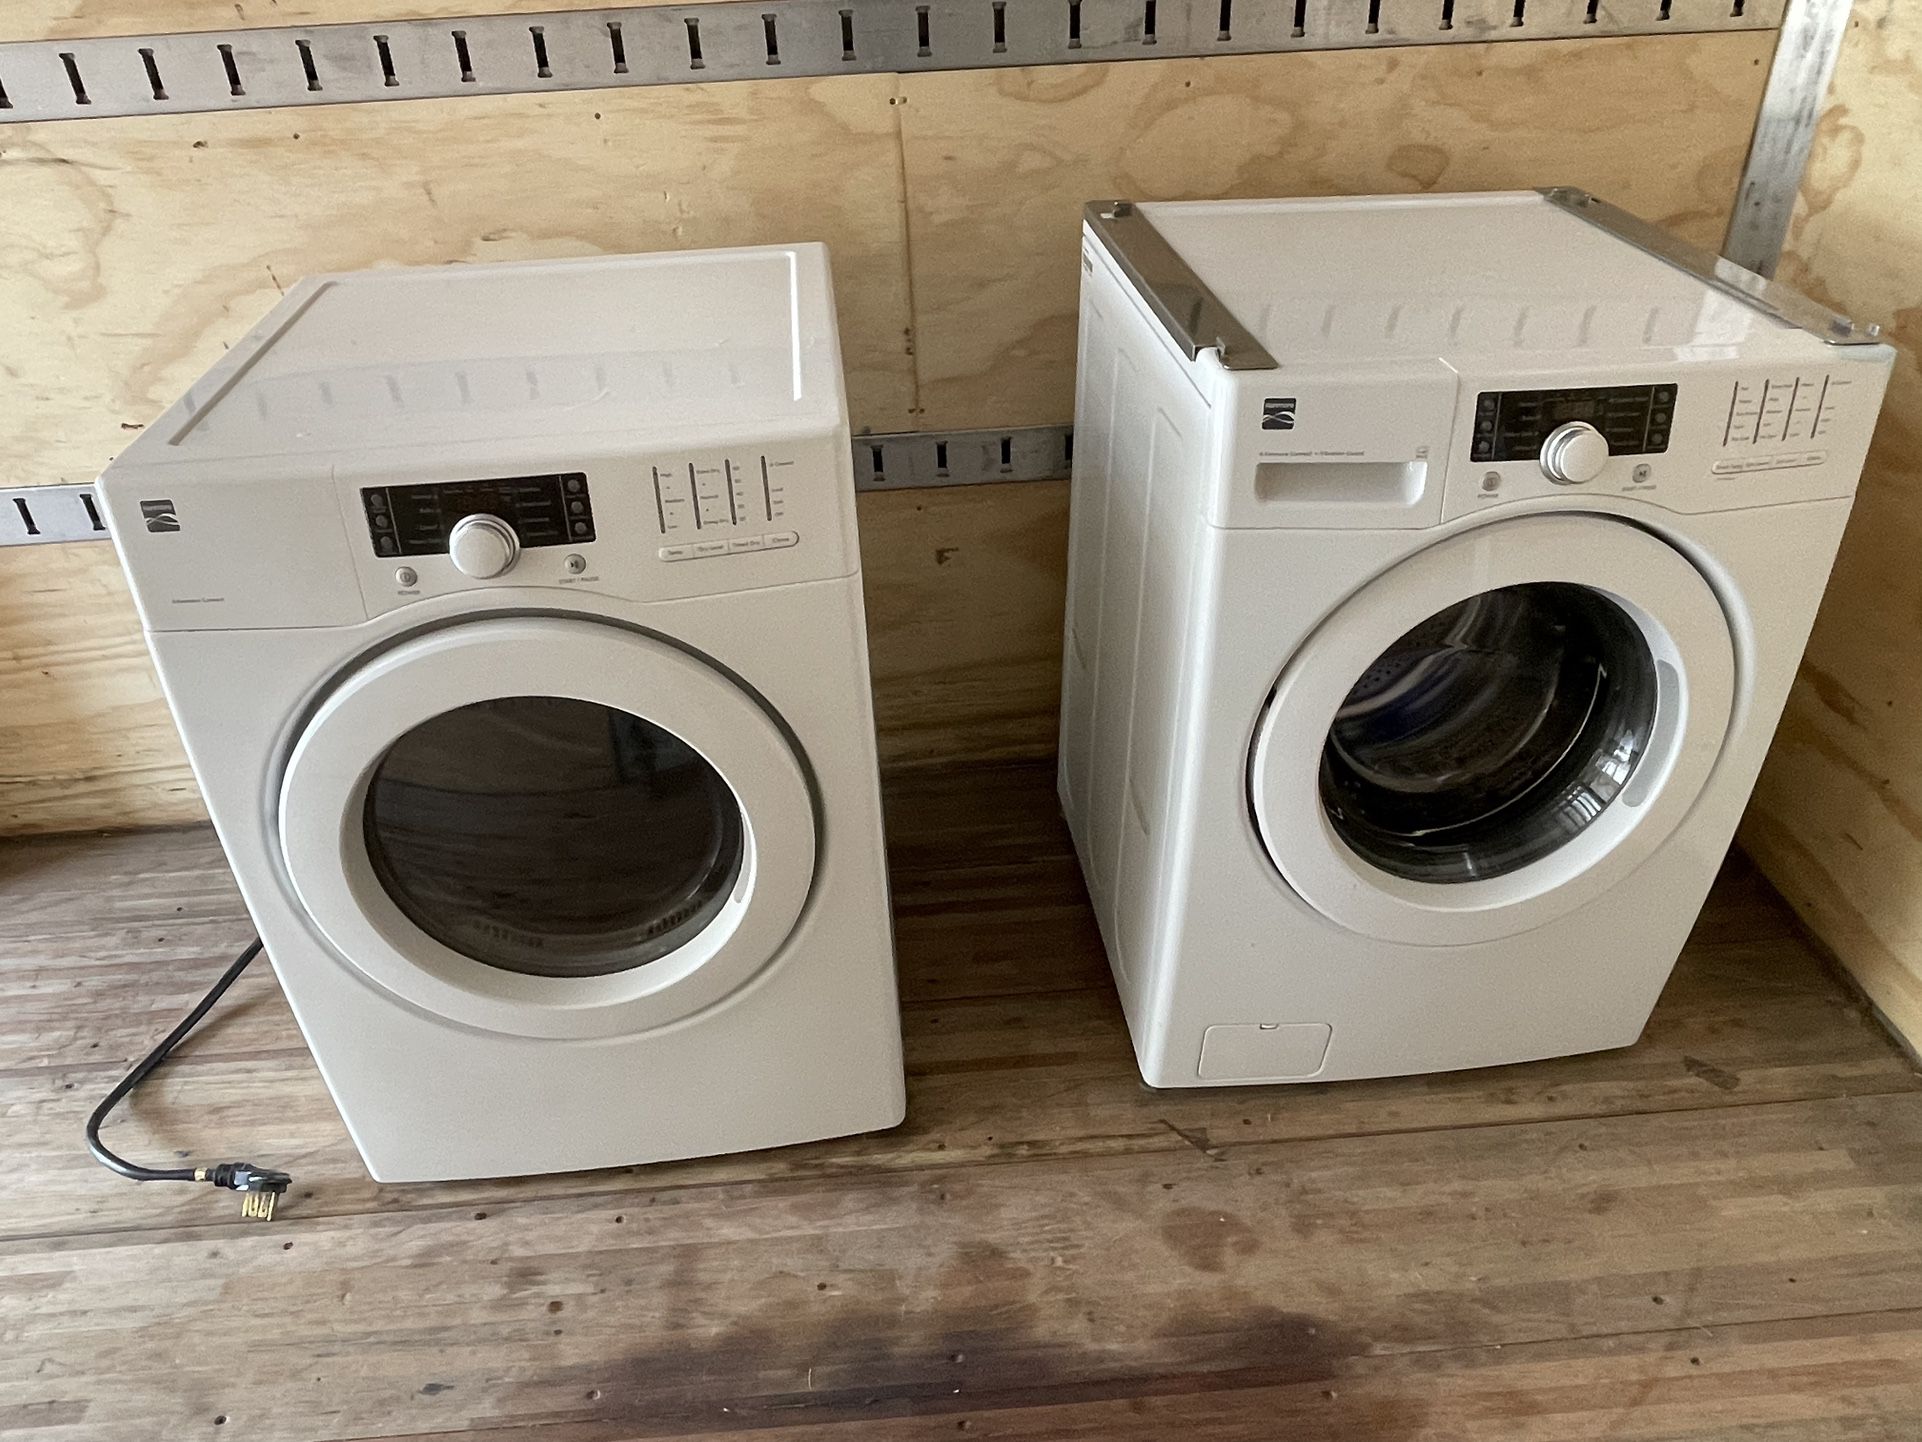 Washer And Dryer( Stackable)